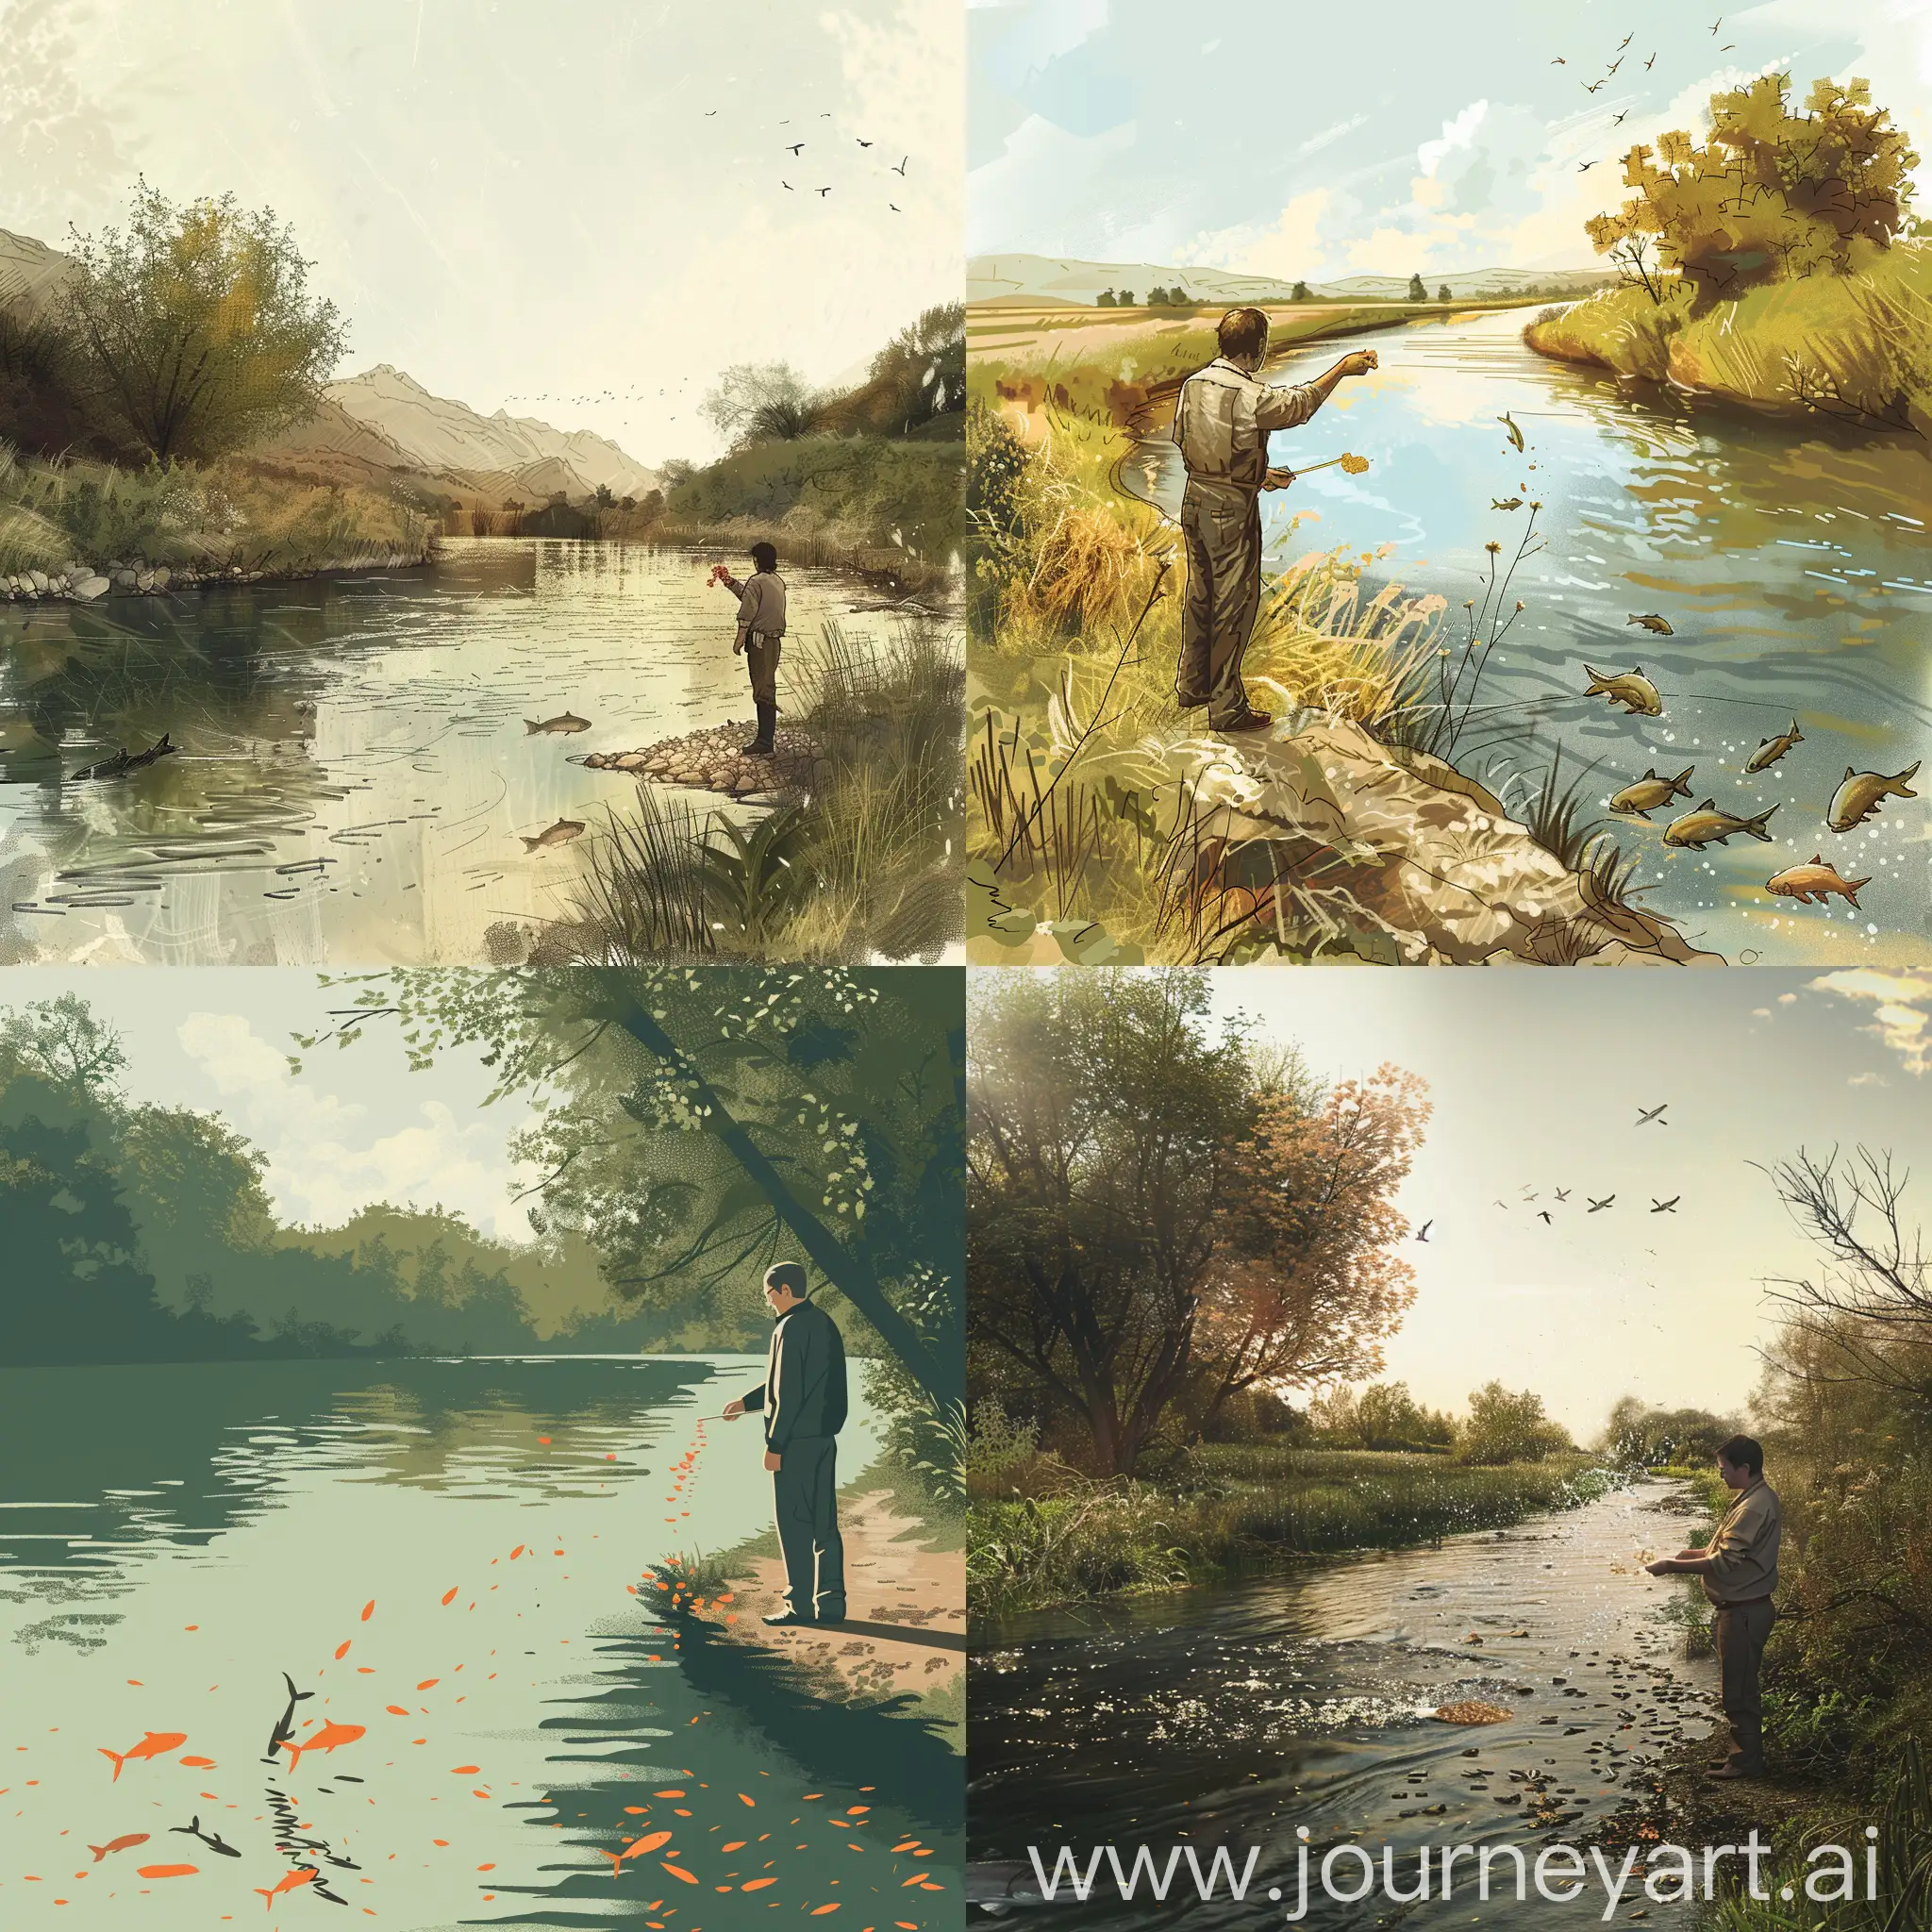 make a design of a man standing beside a river and feeding some food to the fishes 
